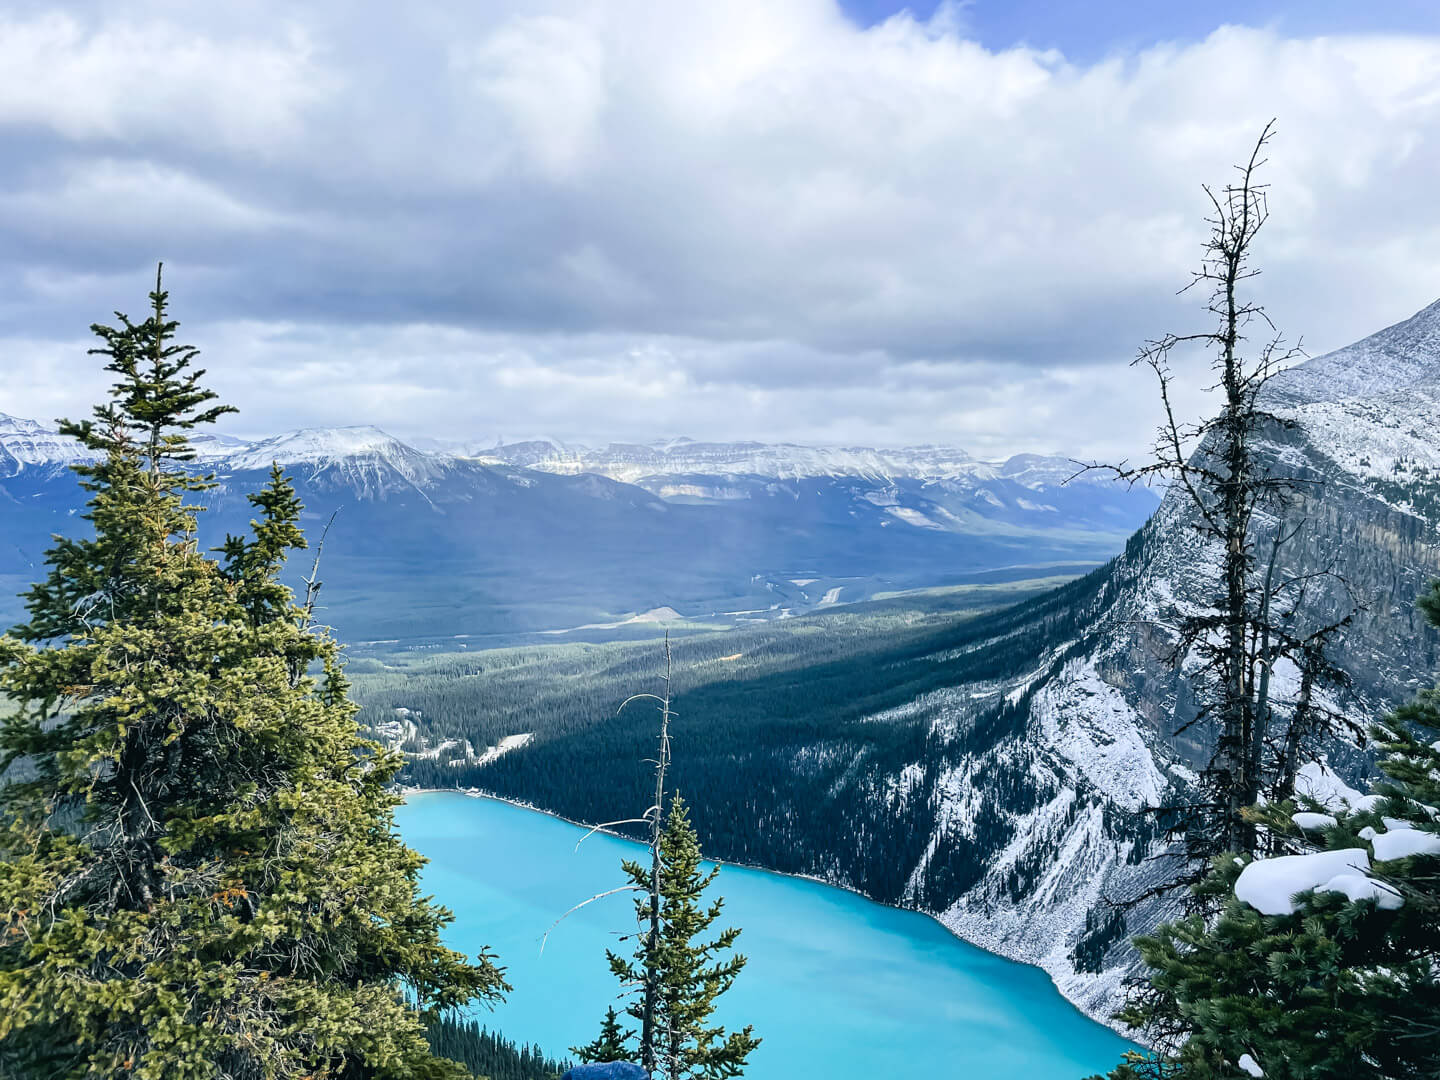 Helpful Tips for Visiting Banff:  Know Before You Go